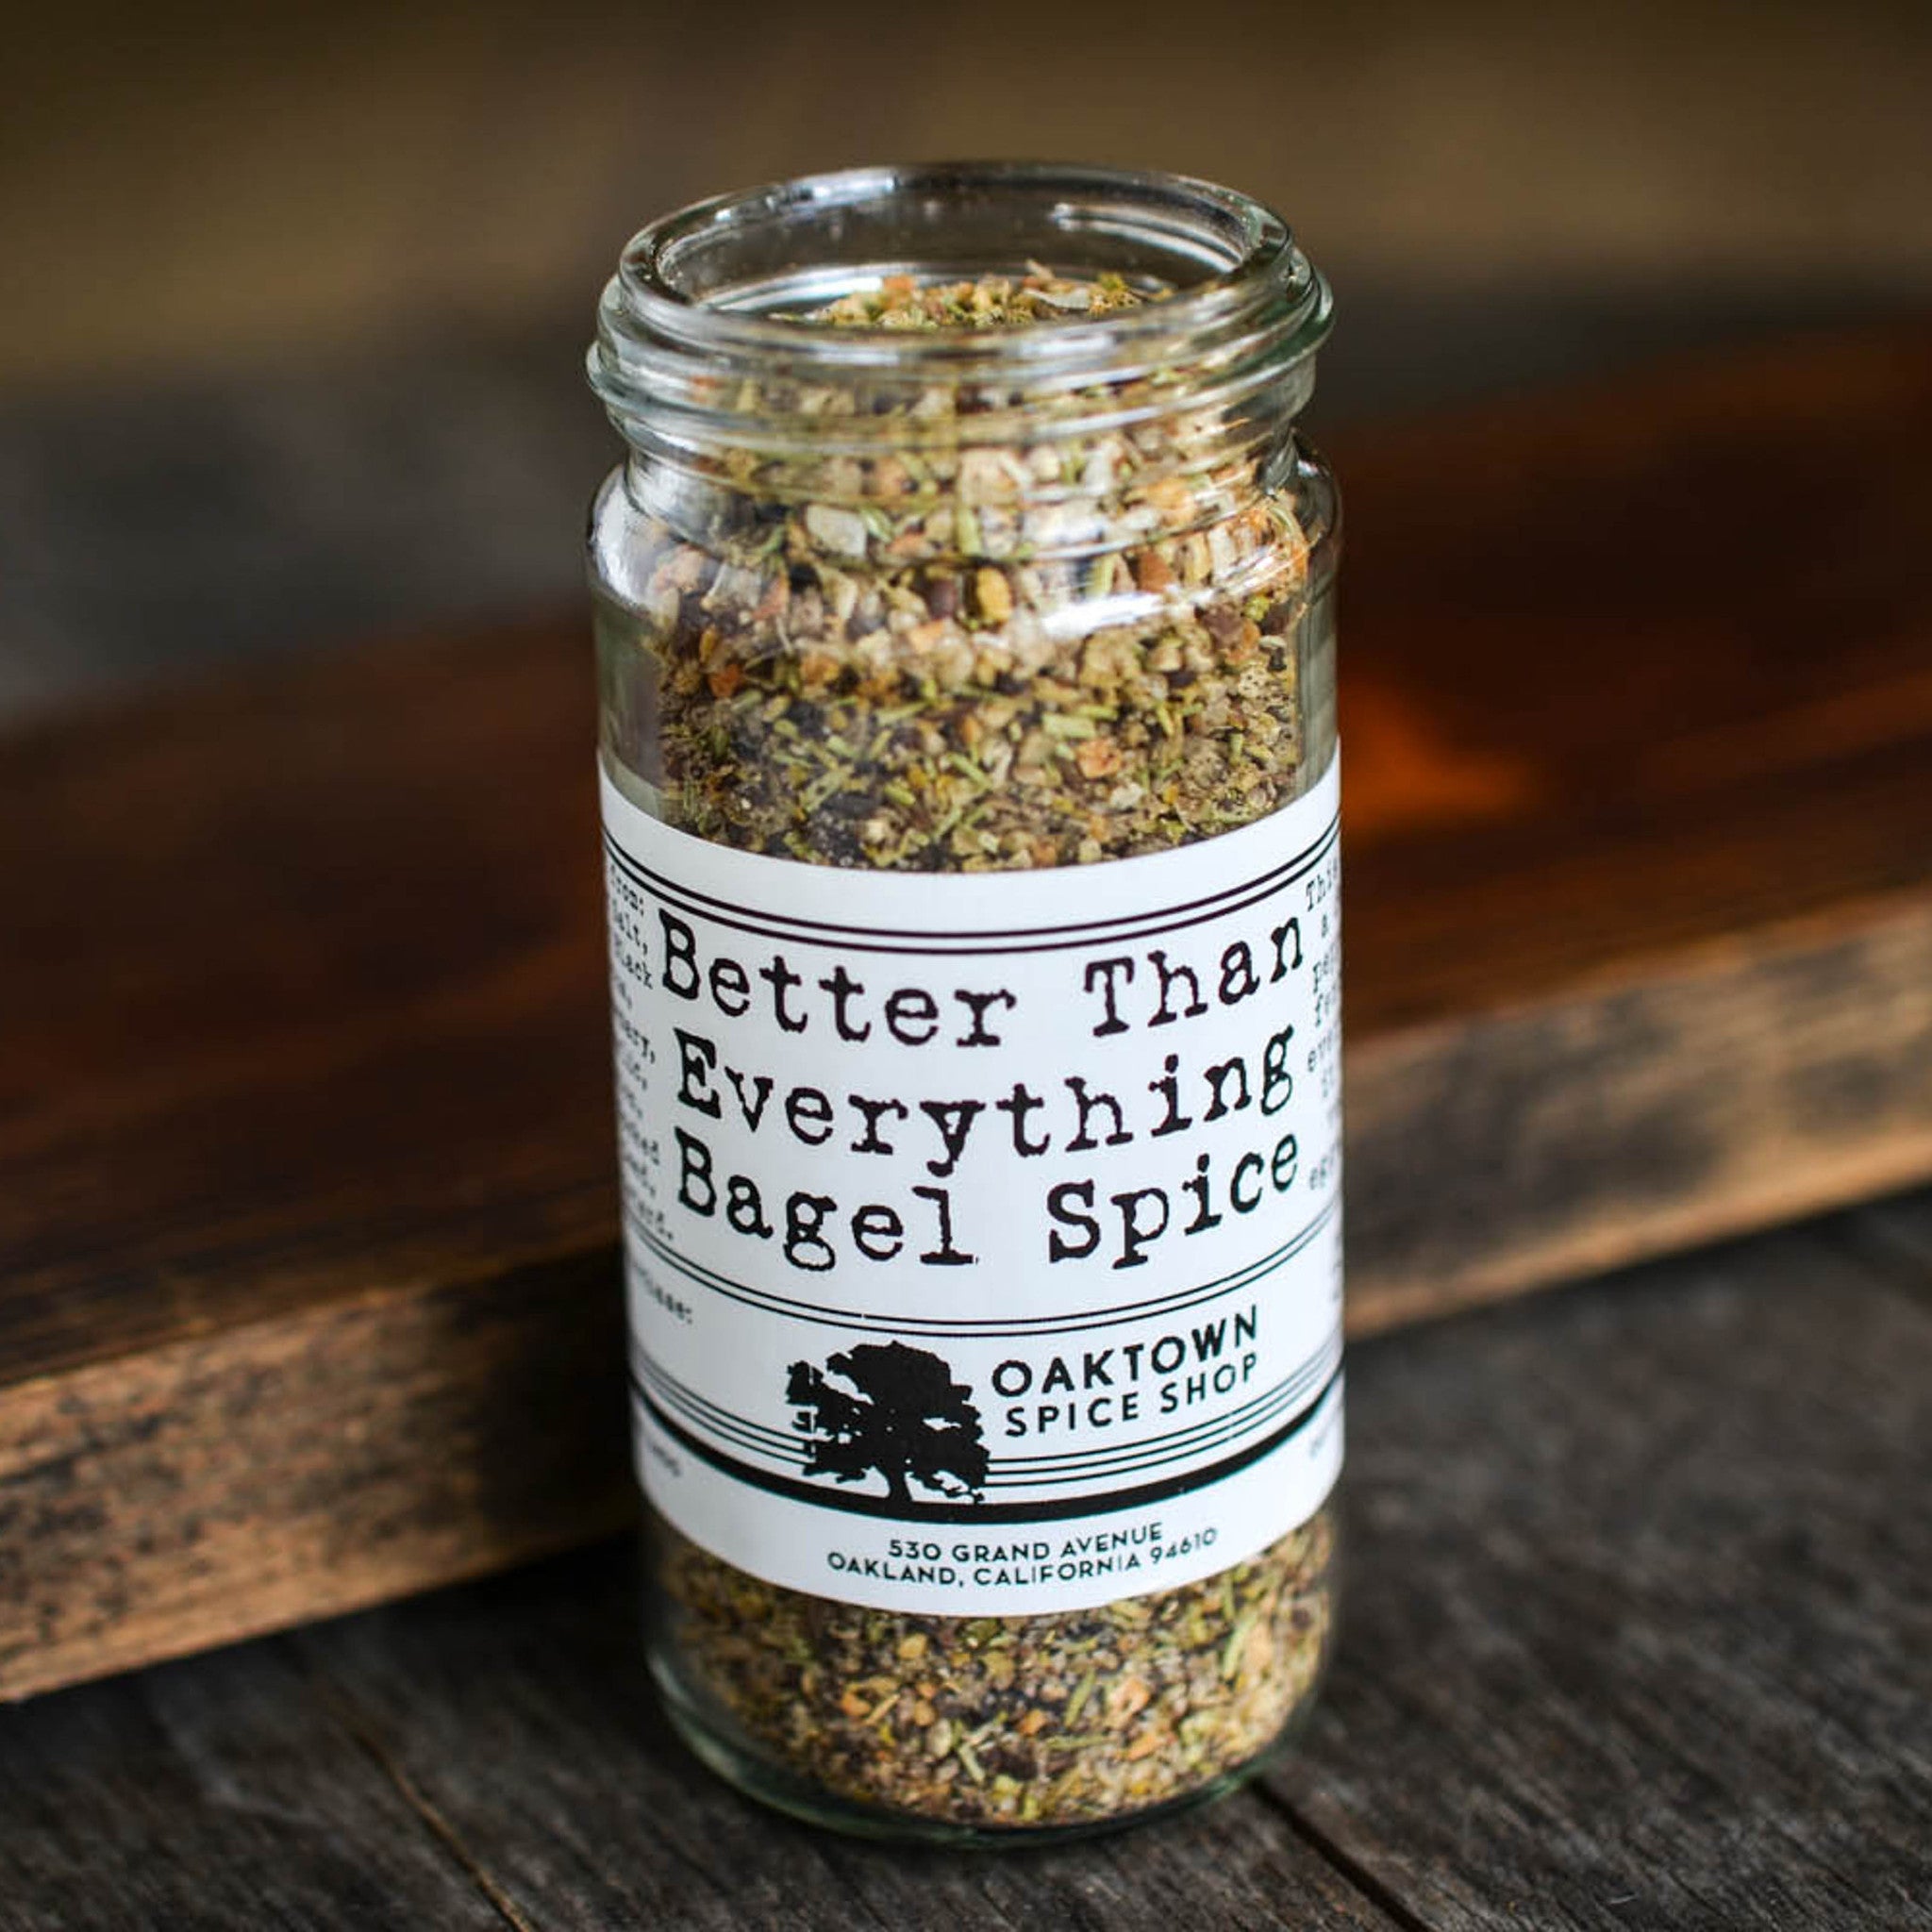 Better Than Everything Bagel Spice for use on Everything Mixed by Oaktown Spice Shop